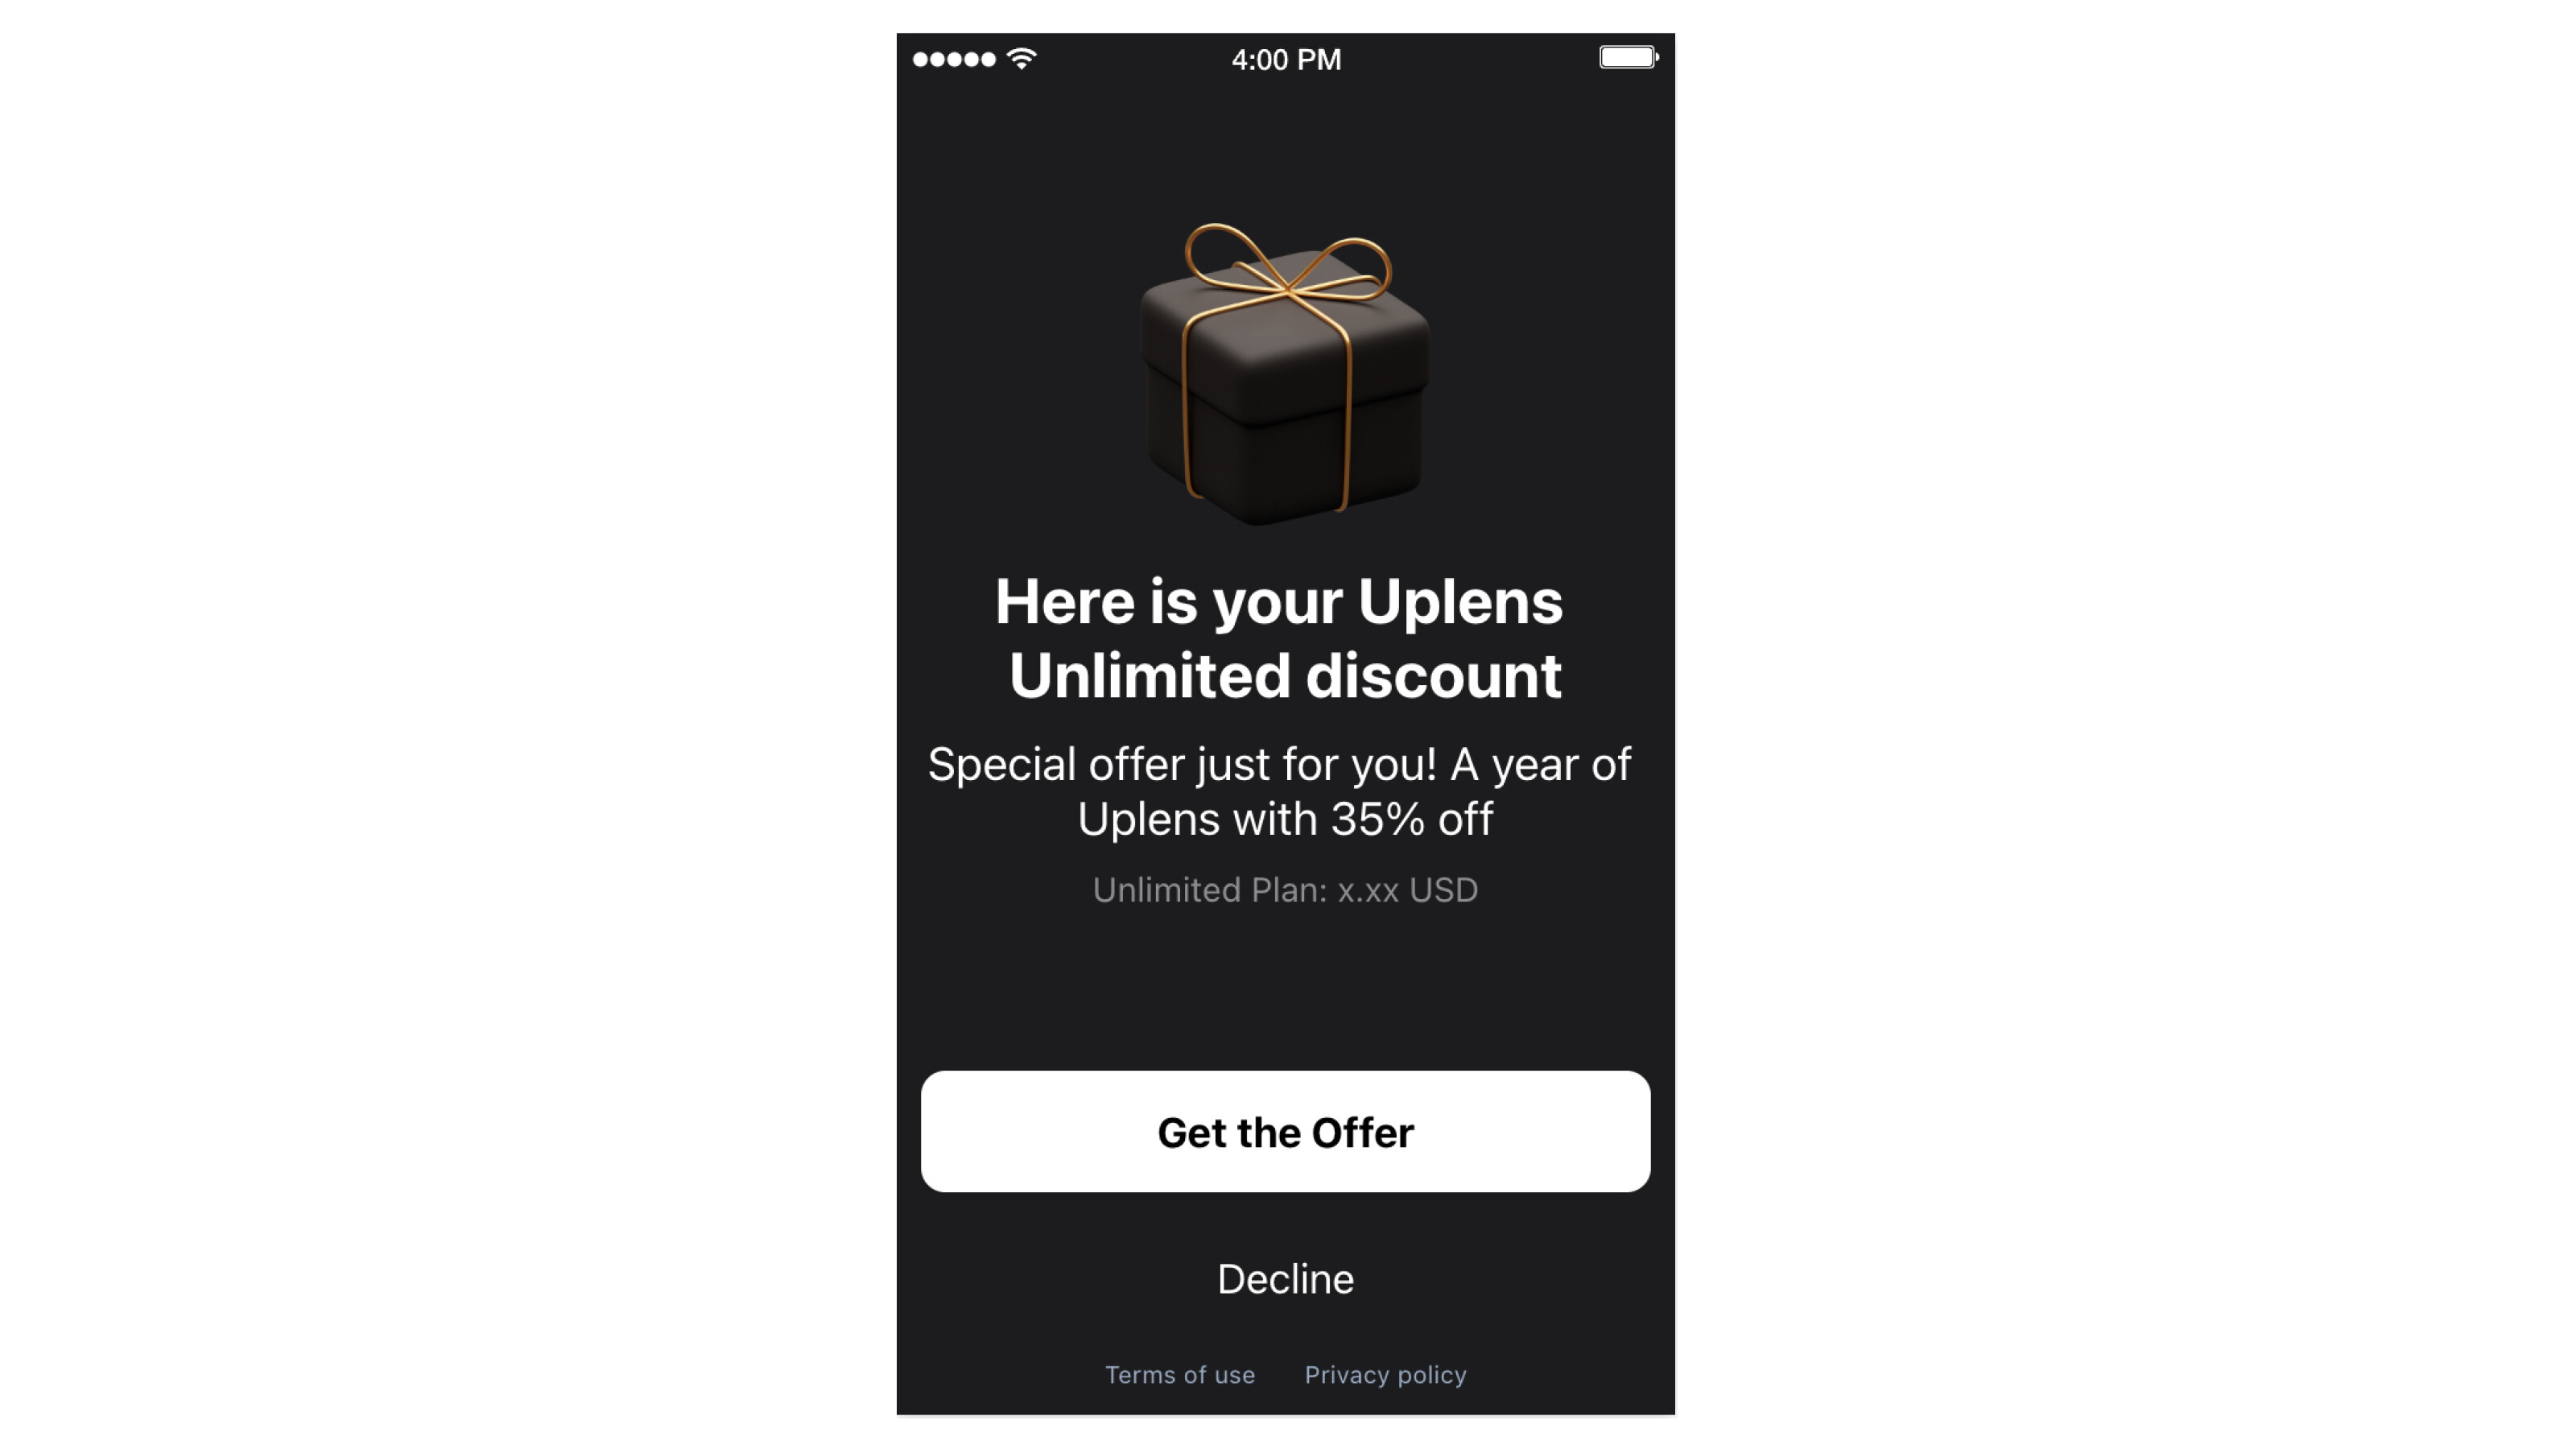 Uplens Paywall created in Apphud